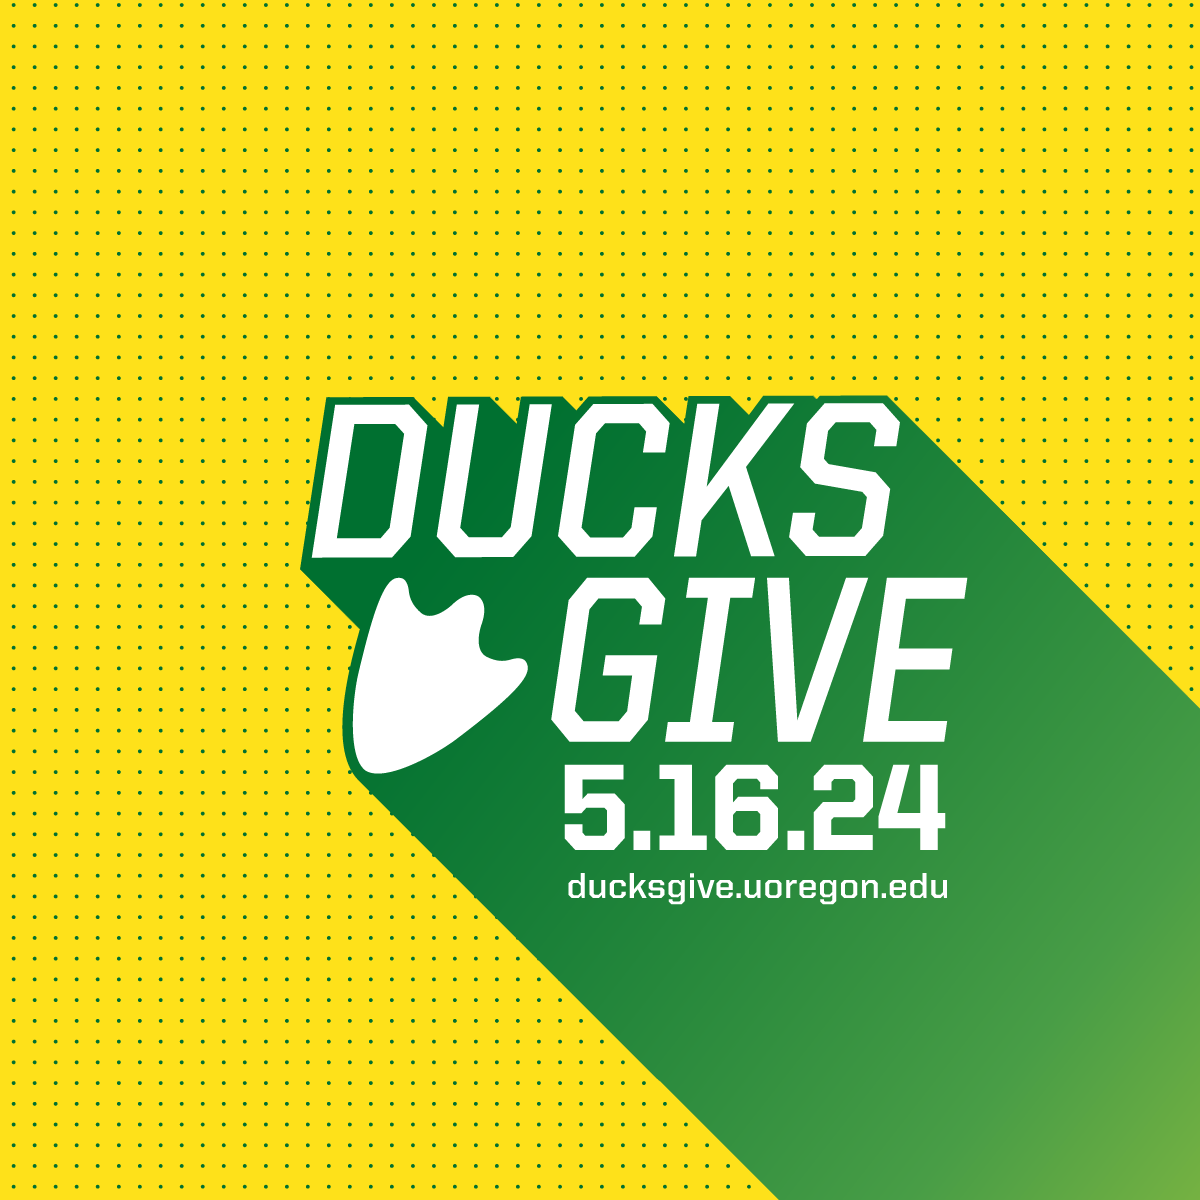 You still have the chance to leverage matching funds and amplify your support for @UO_KCGradIntern students. Donate today and change the lives of those who need it most. #DucksGive #KnightCampus #KCGIP bit.ly/450aNk5